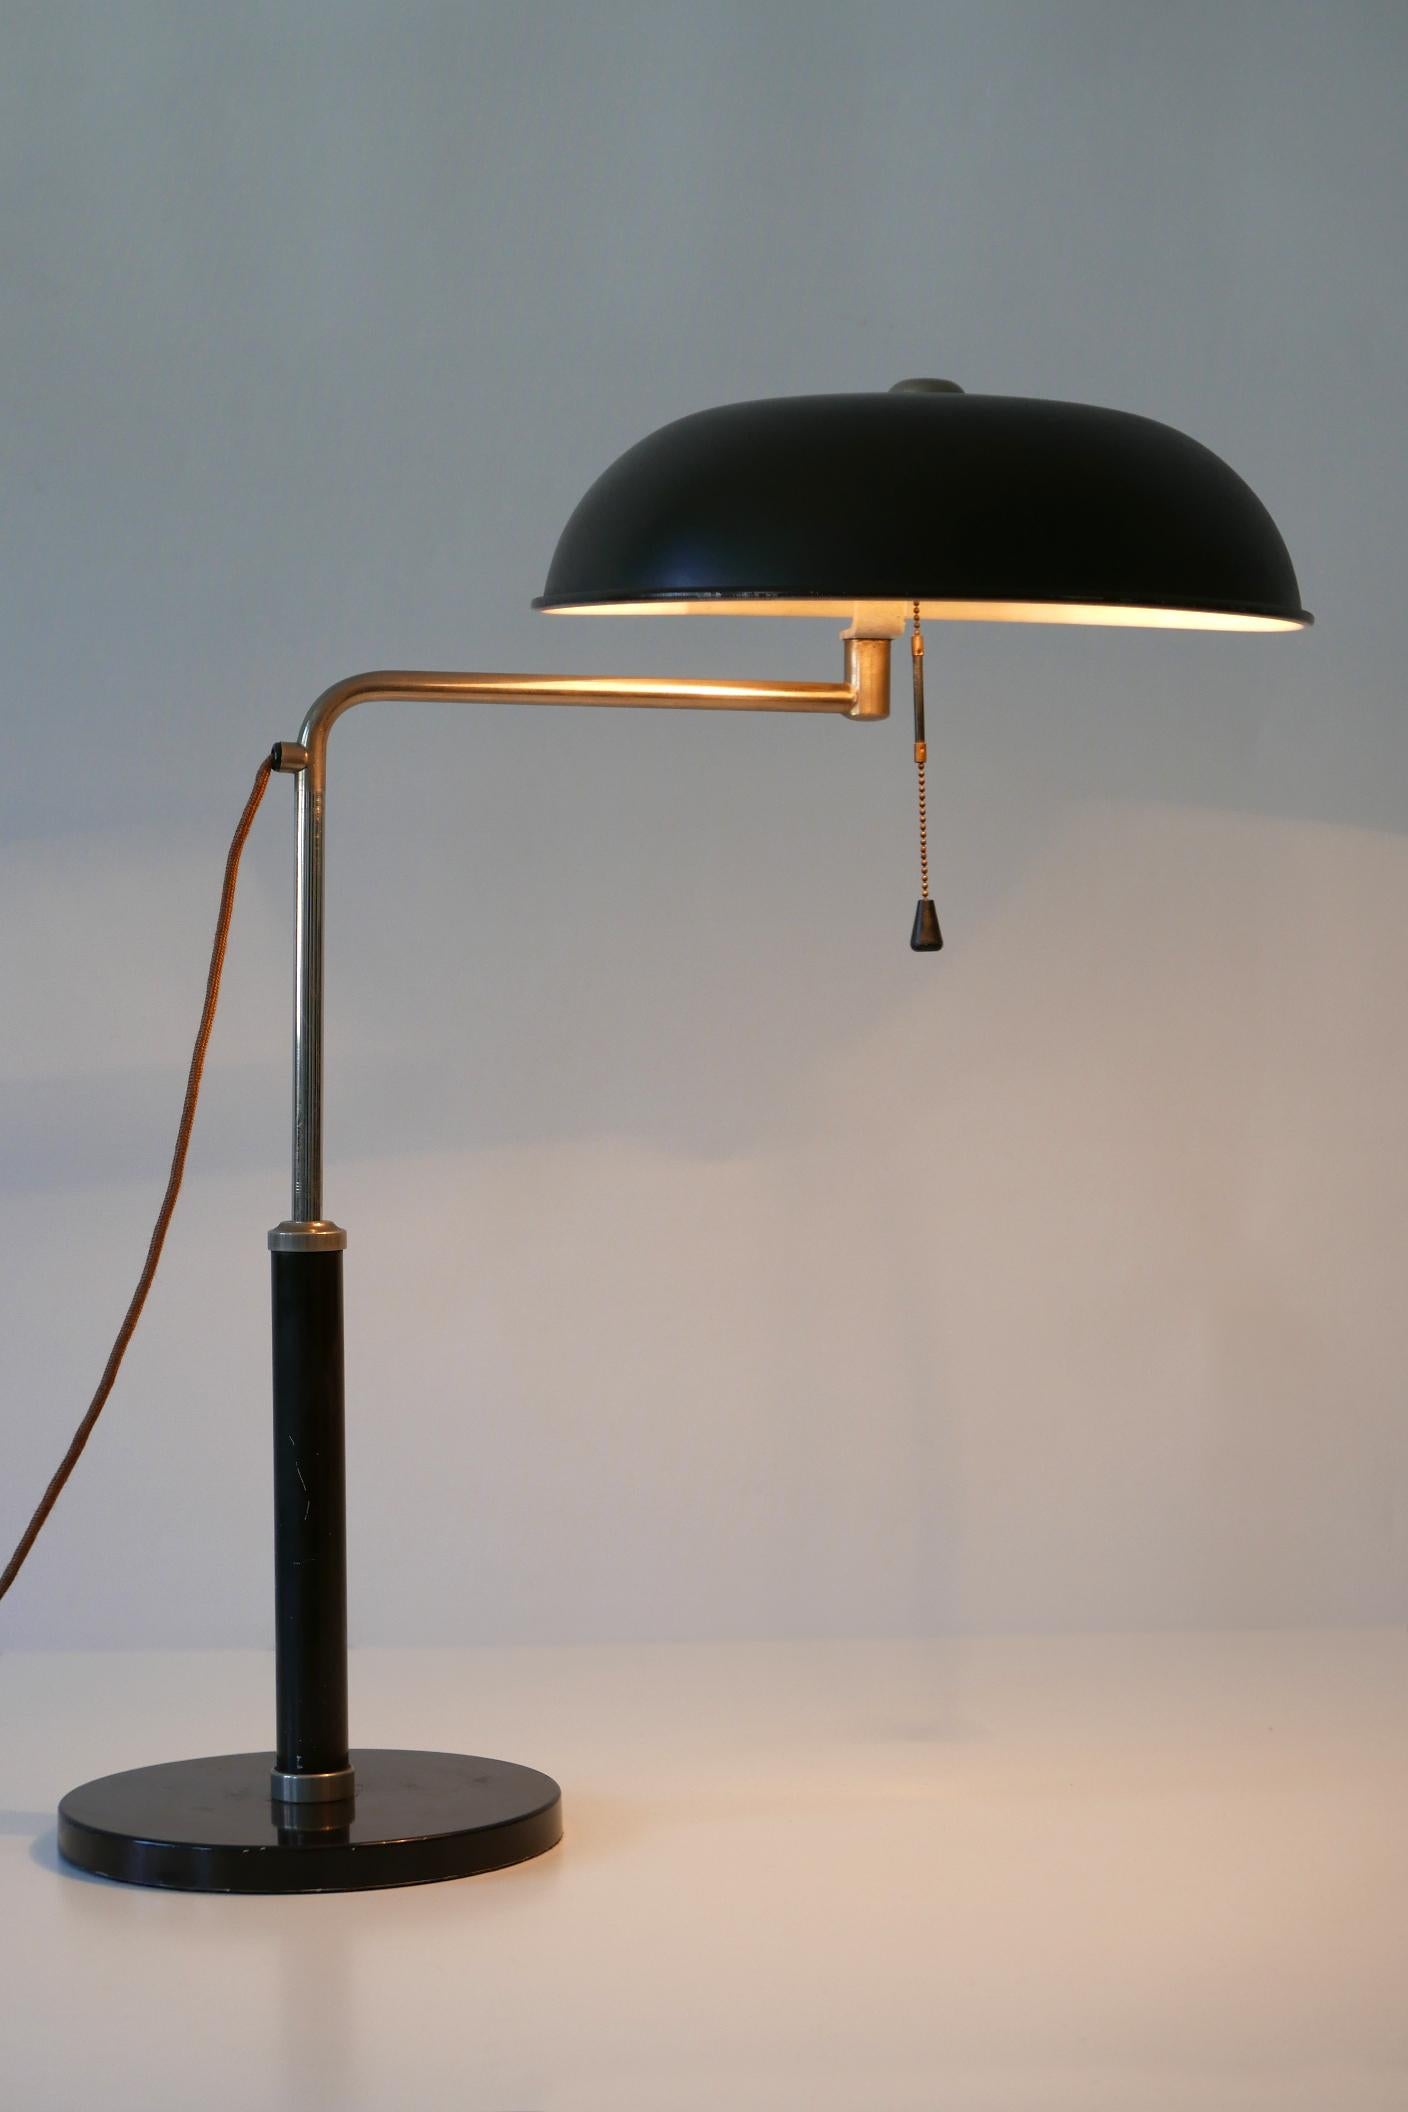 Elegant and adjustable Bauhaus / Art Deco table lamp or desk light. Designed by Alfred Müller for Amba, 1930s, Switzerland.

Executed in dark brown and white enameled aluminium, nickel-plated brass and cast iron, the lamp comes with 1 x E27 / E26